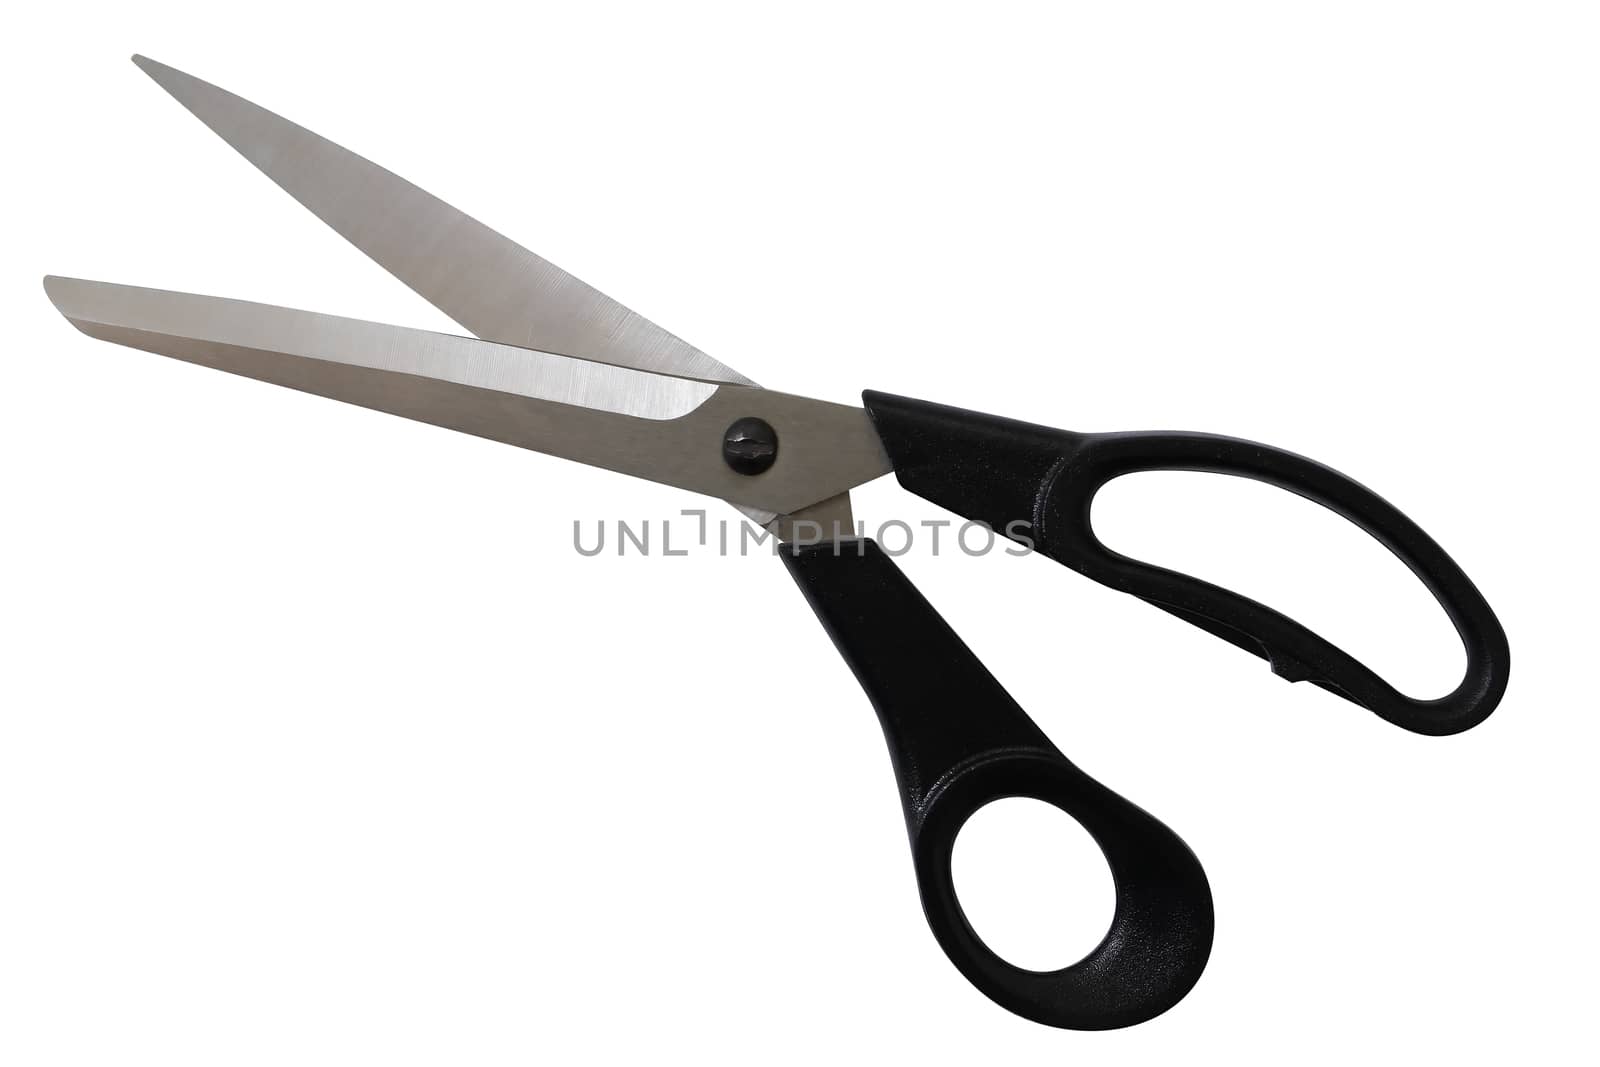 Scissors isolated on white background with clipping path